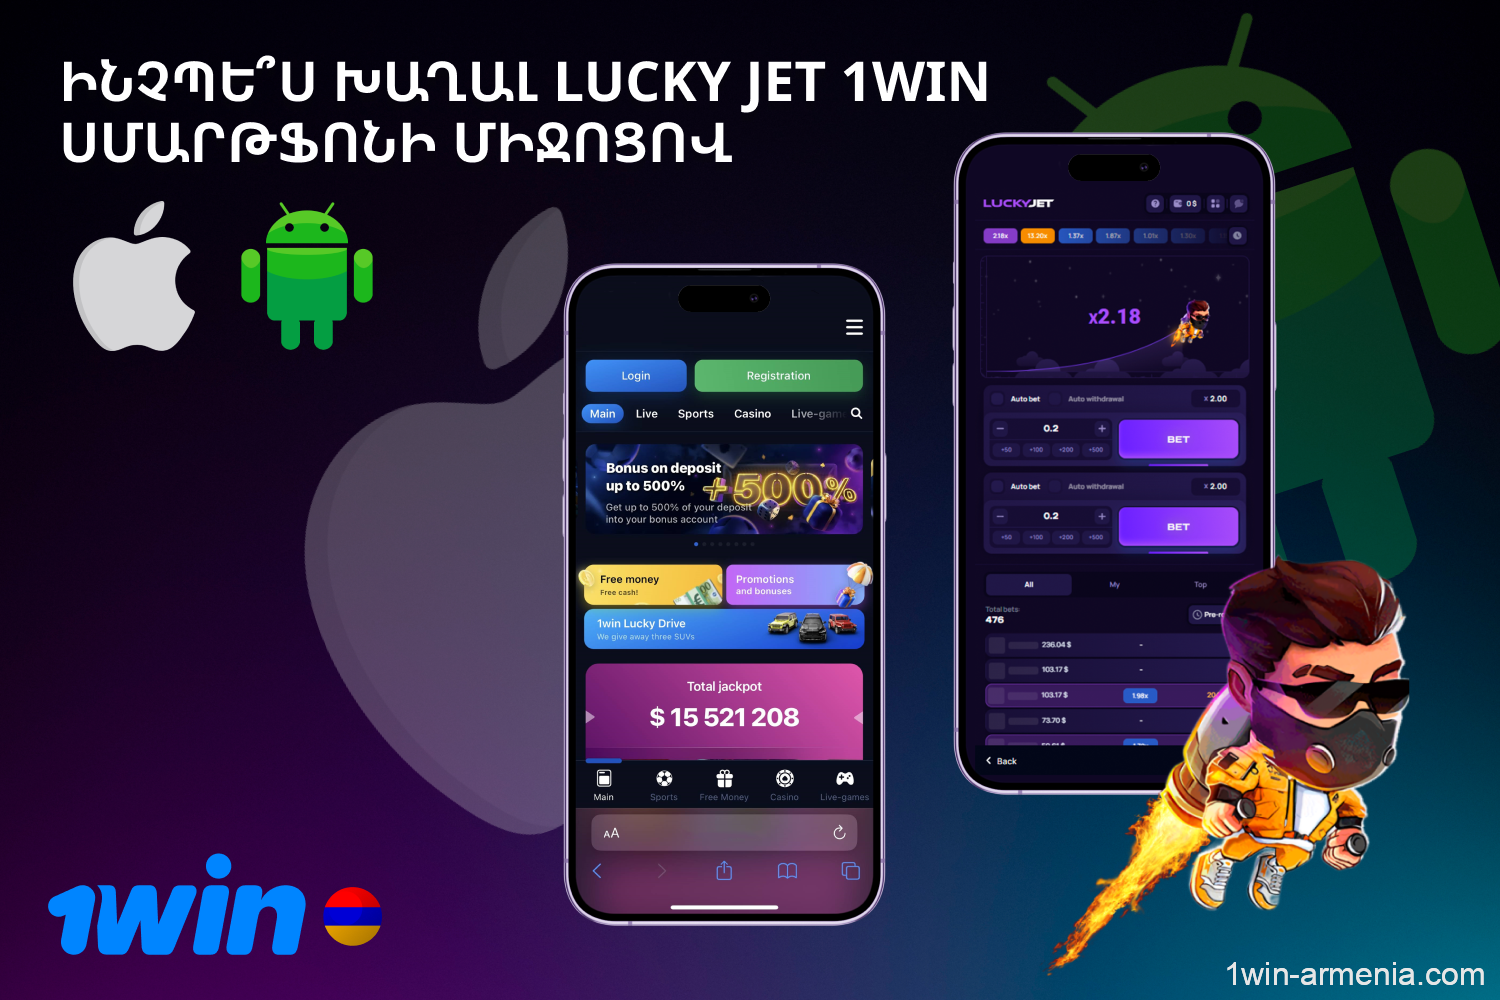 To place the first bet in the Lucky Jet game, a player must install the 1win app, register and make a deposit